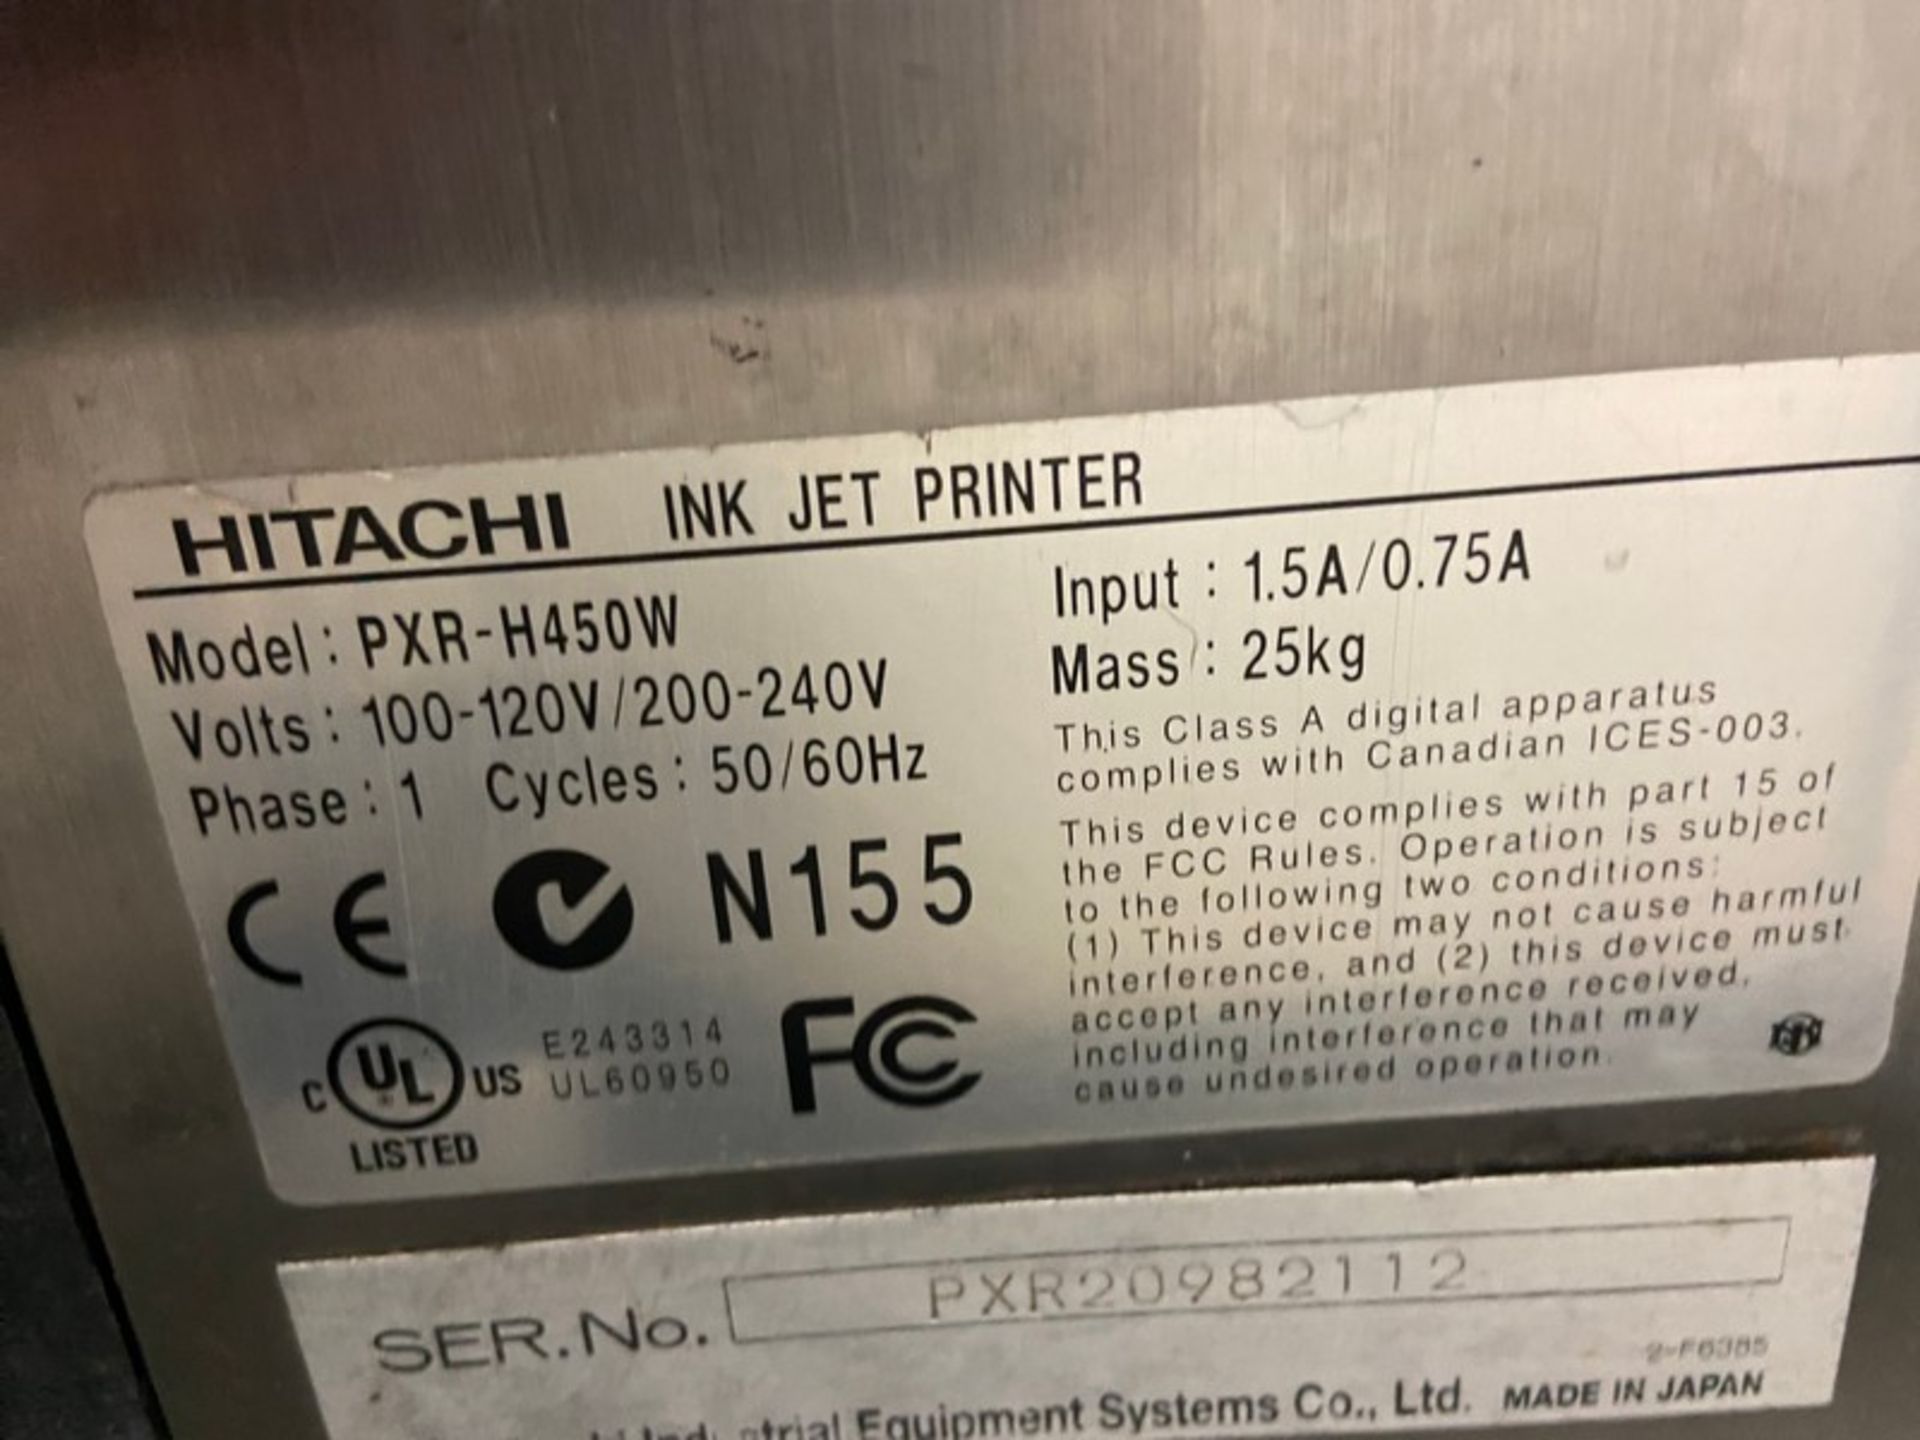 HITACHI Ink Jet Printer, M/N PXR-H450W, S/N PXR20982112, 100-120/200-240 Volts, 1 Phase, with Ink - Image 5 of 5